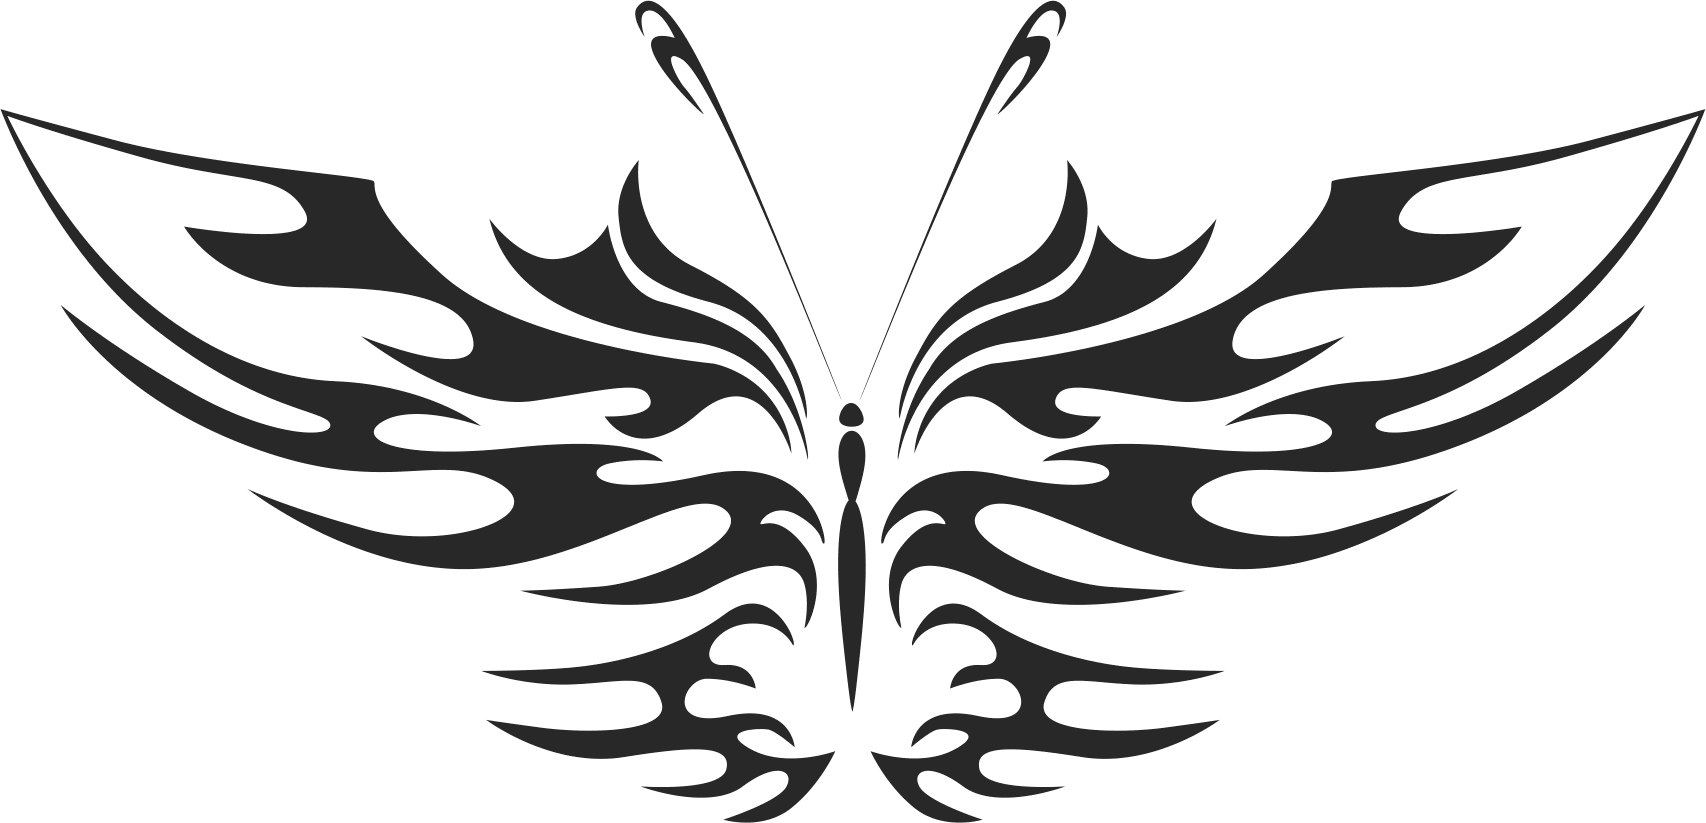 Tattoo Tribal Butterfly Vector Art Free DXF Vectors File